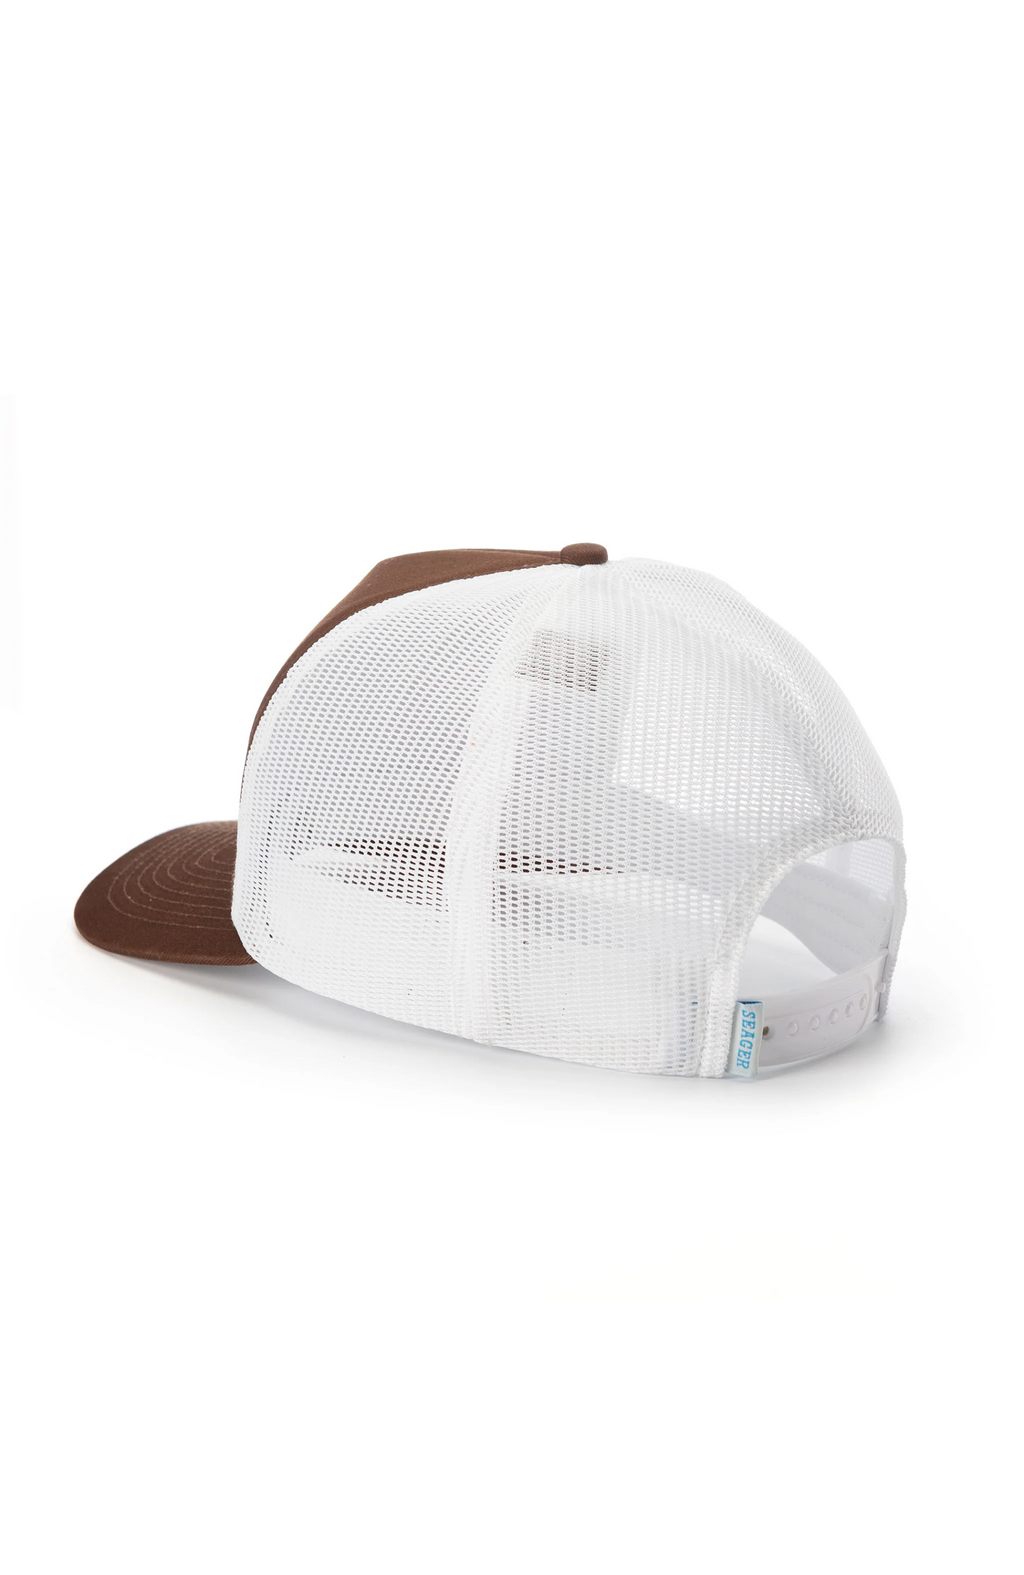 Seager - Old Town Mesh Snapback